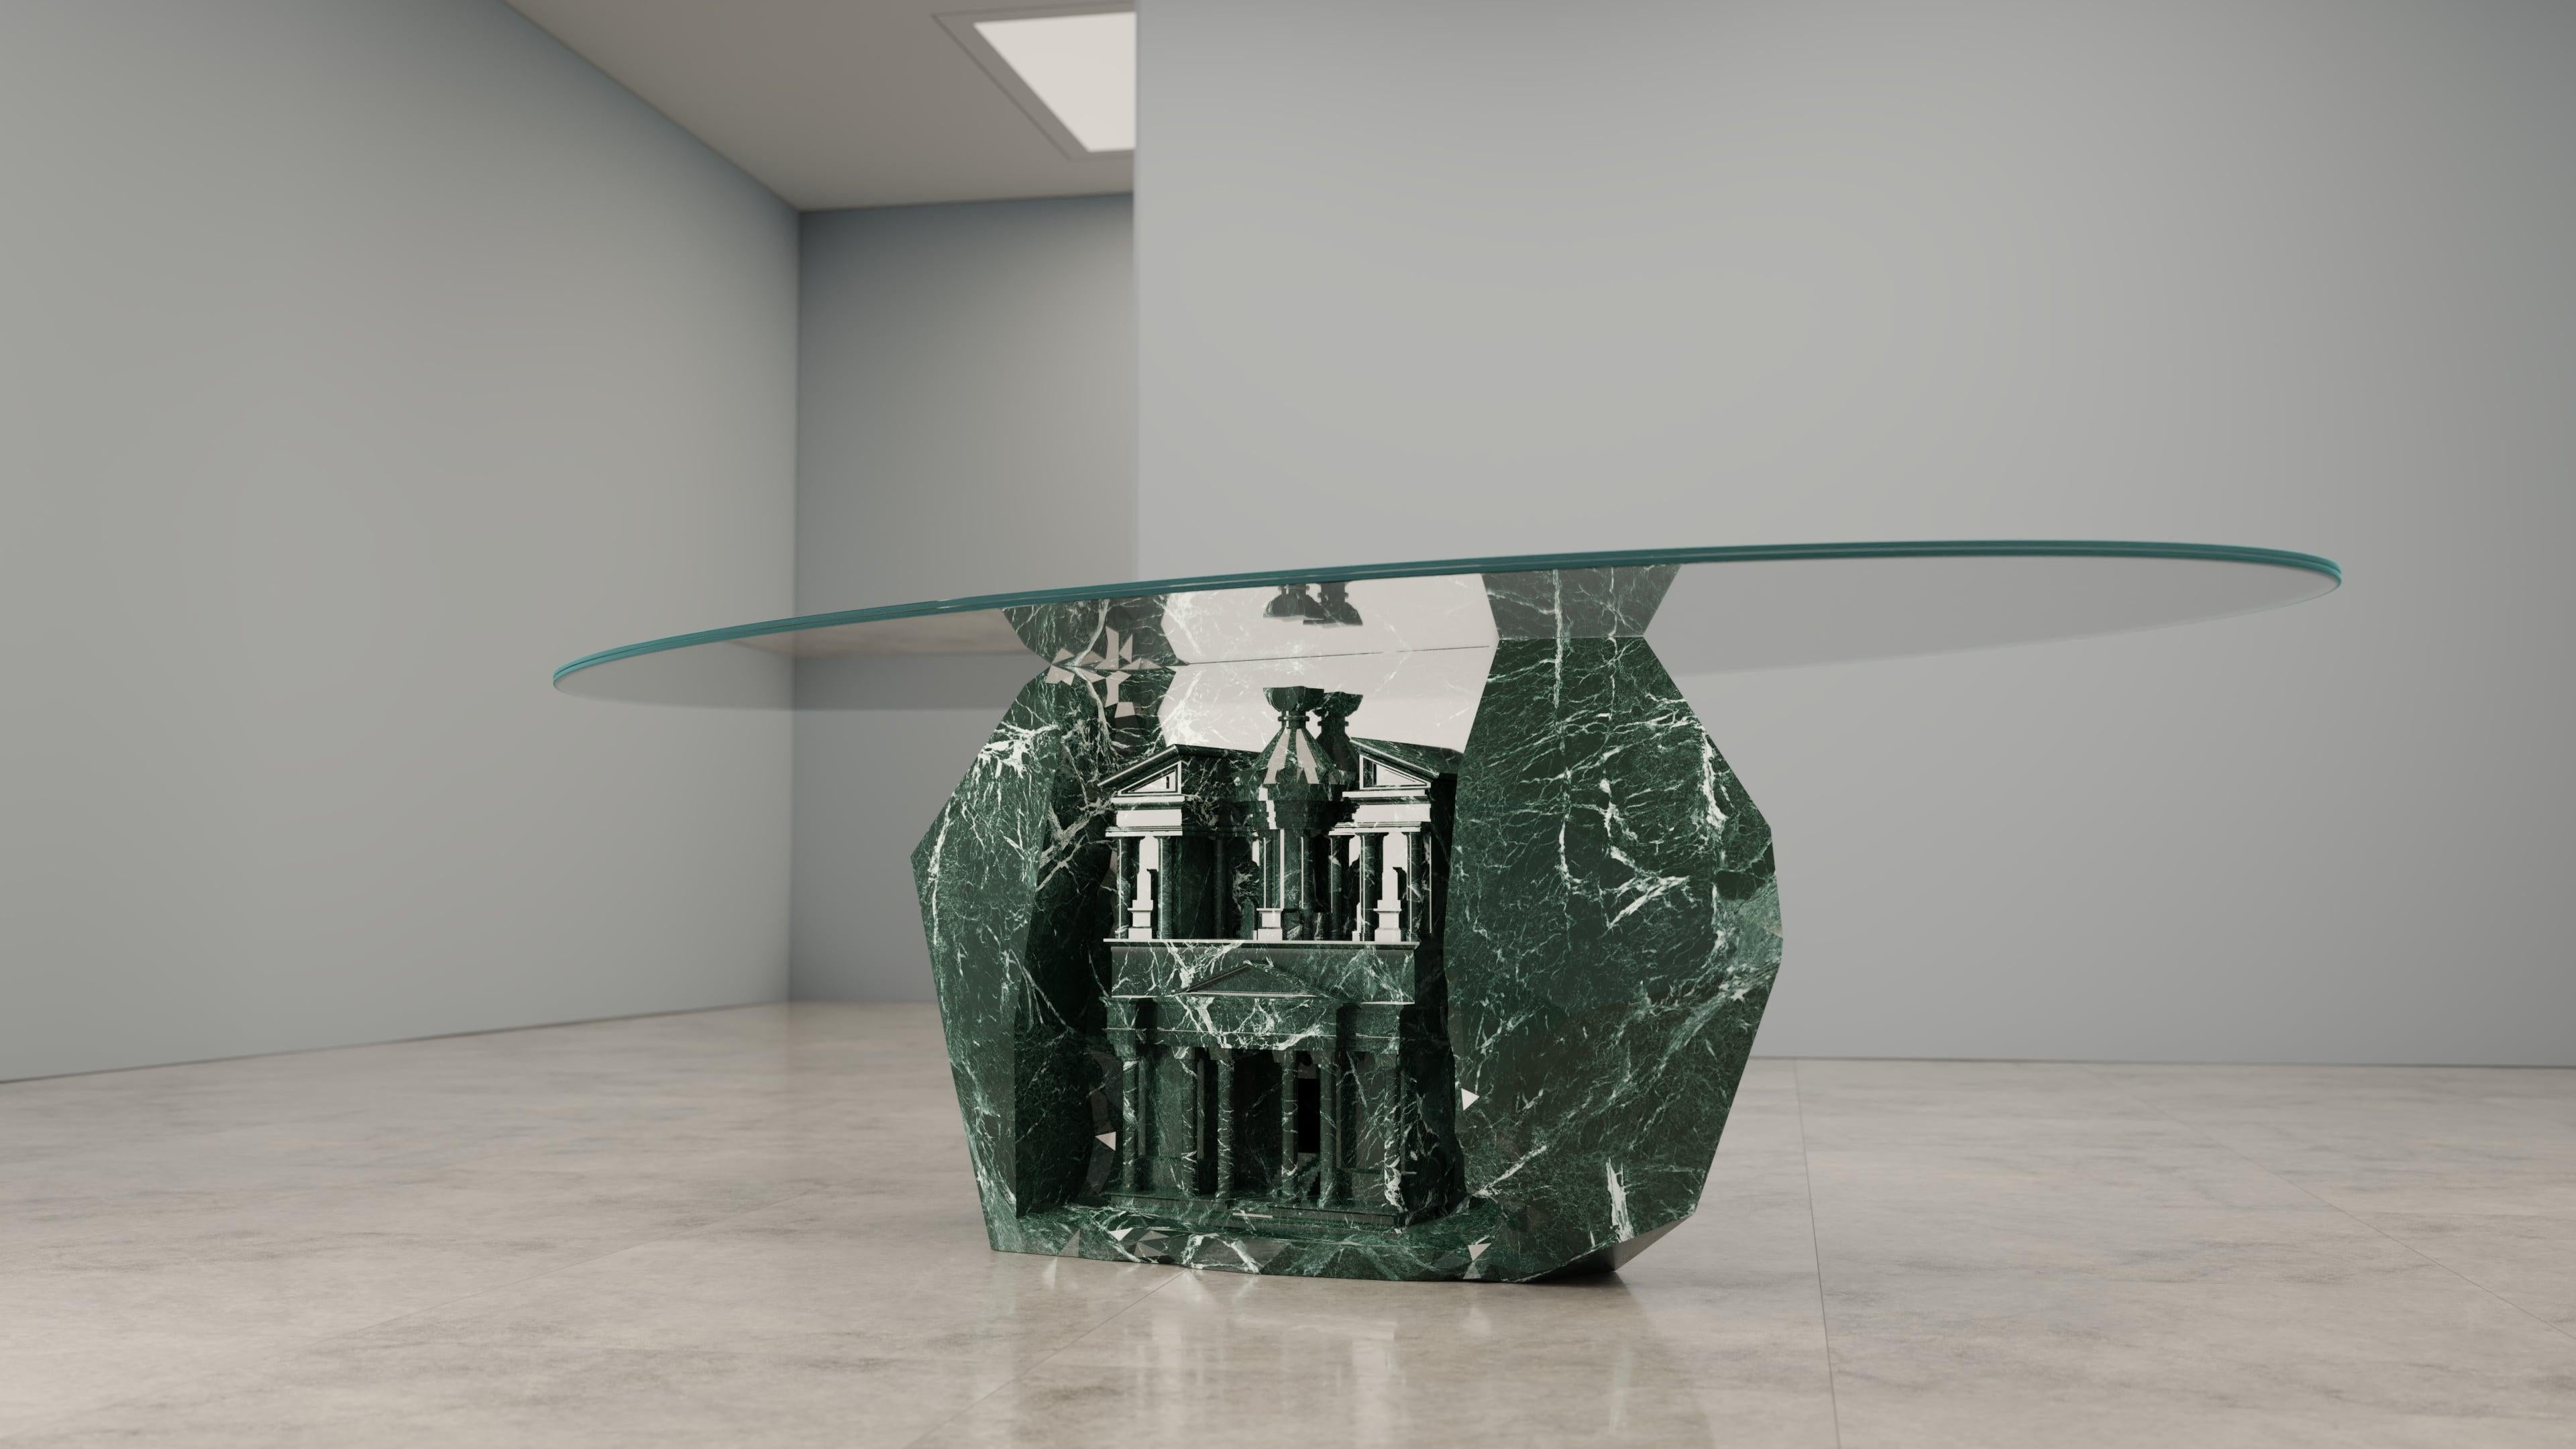 Civilization is a series of uniquely hand-carved marble tables, based on ancient Temples and Monuments hewn from their surrounding landscapes. The series pays homage to their great artistry, to create pieces that will last for the civilizations that